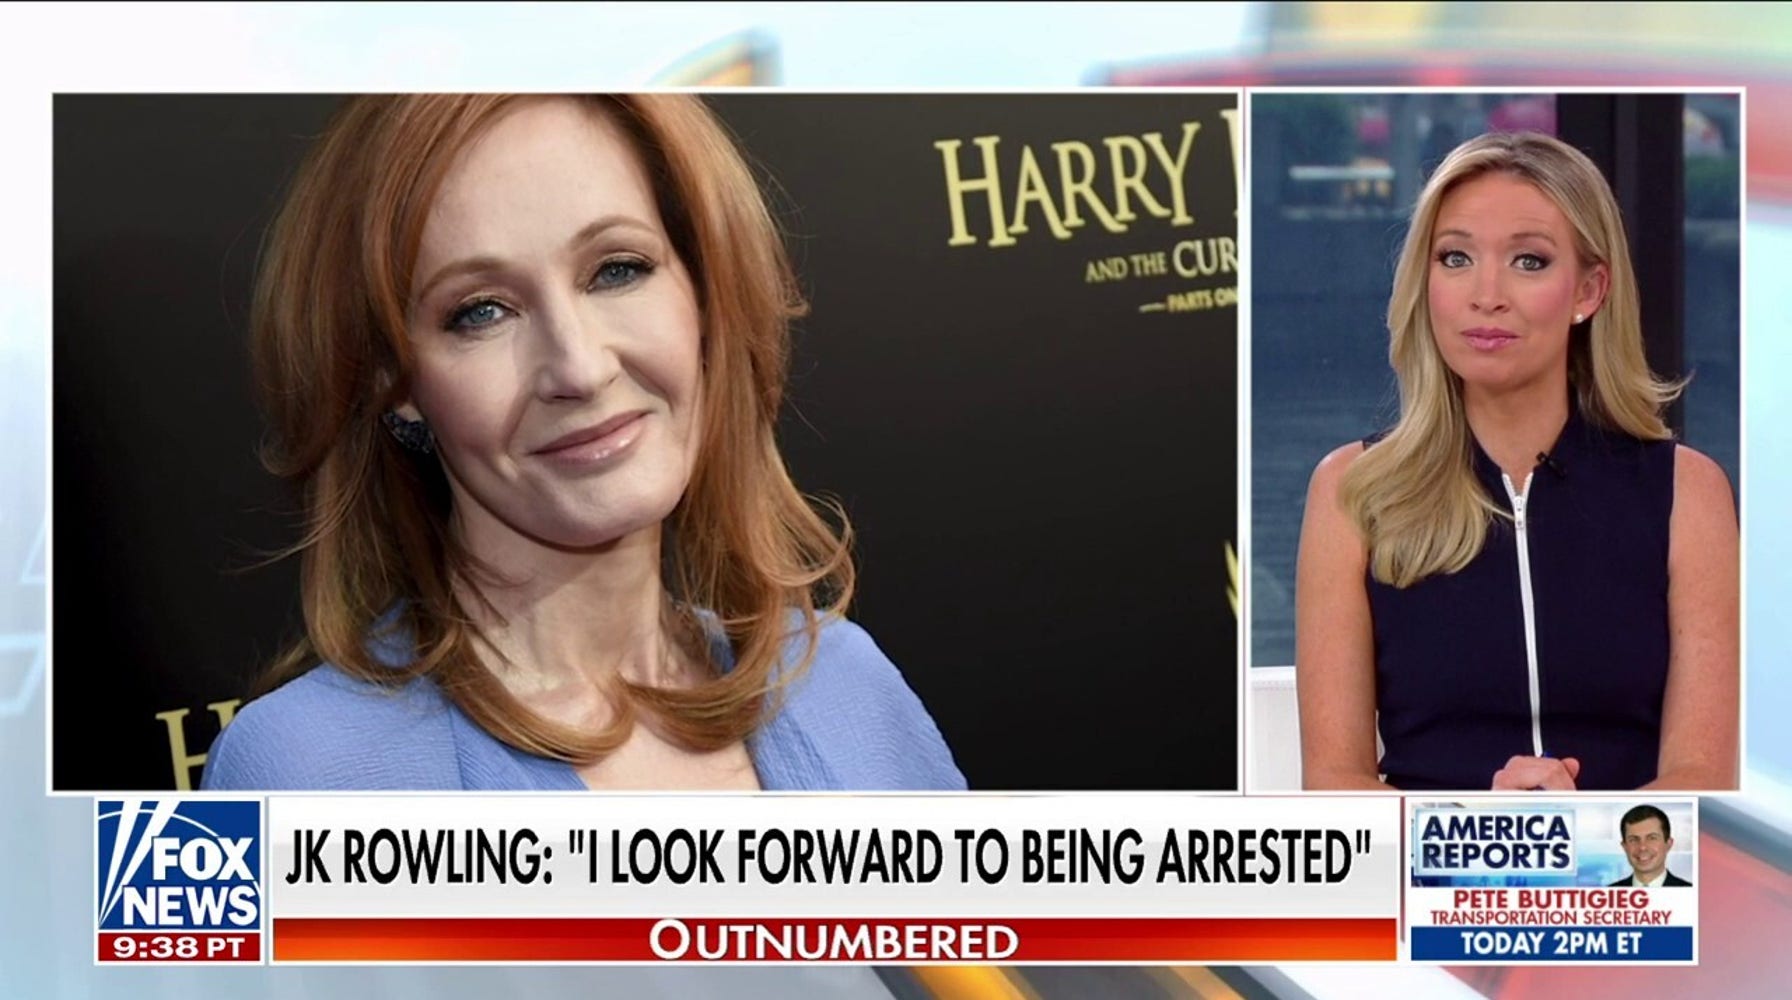 J.K. Rowling 'Practically Daring Police' to Arrest Her After New Hate Crime Law